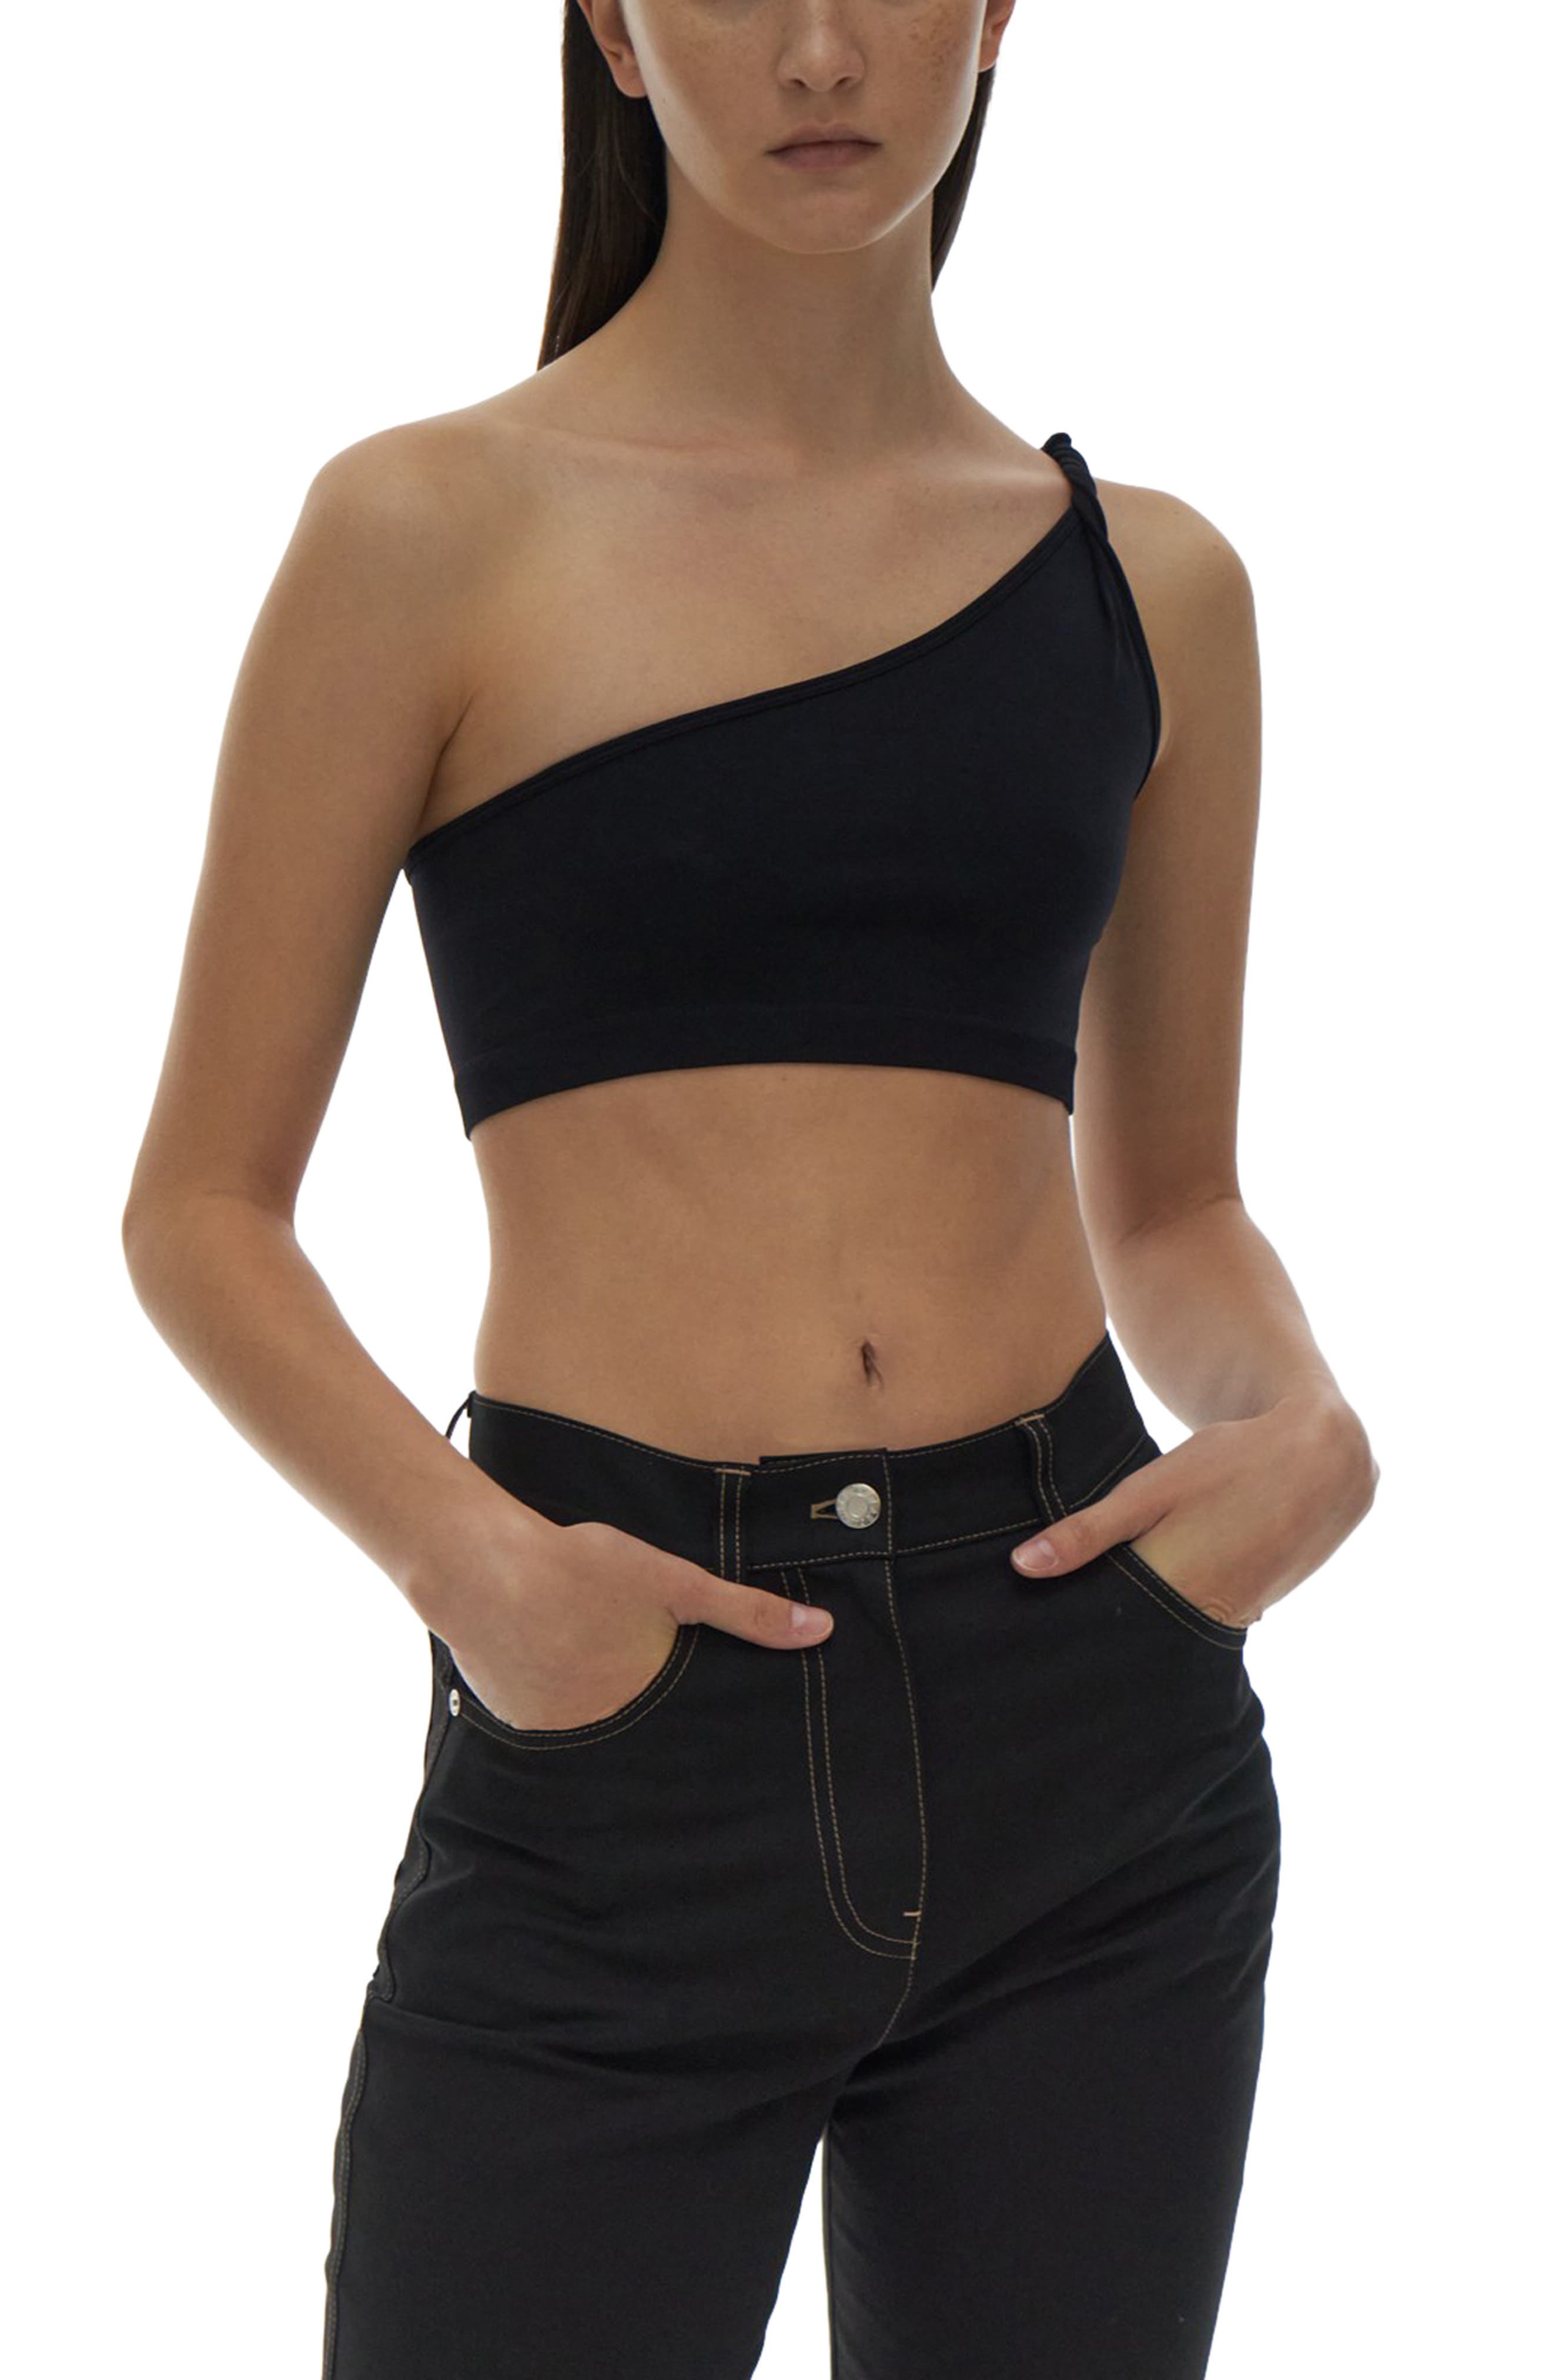 Helmut Lang Asymmetric Twist One Shoulder Bralette in Black at Nordstrom, Size X-Small